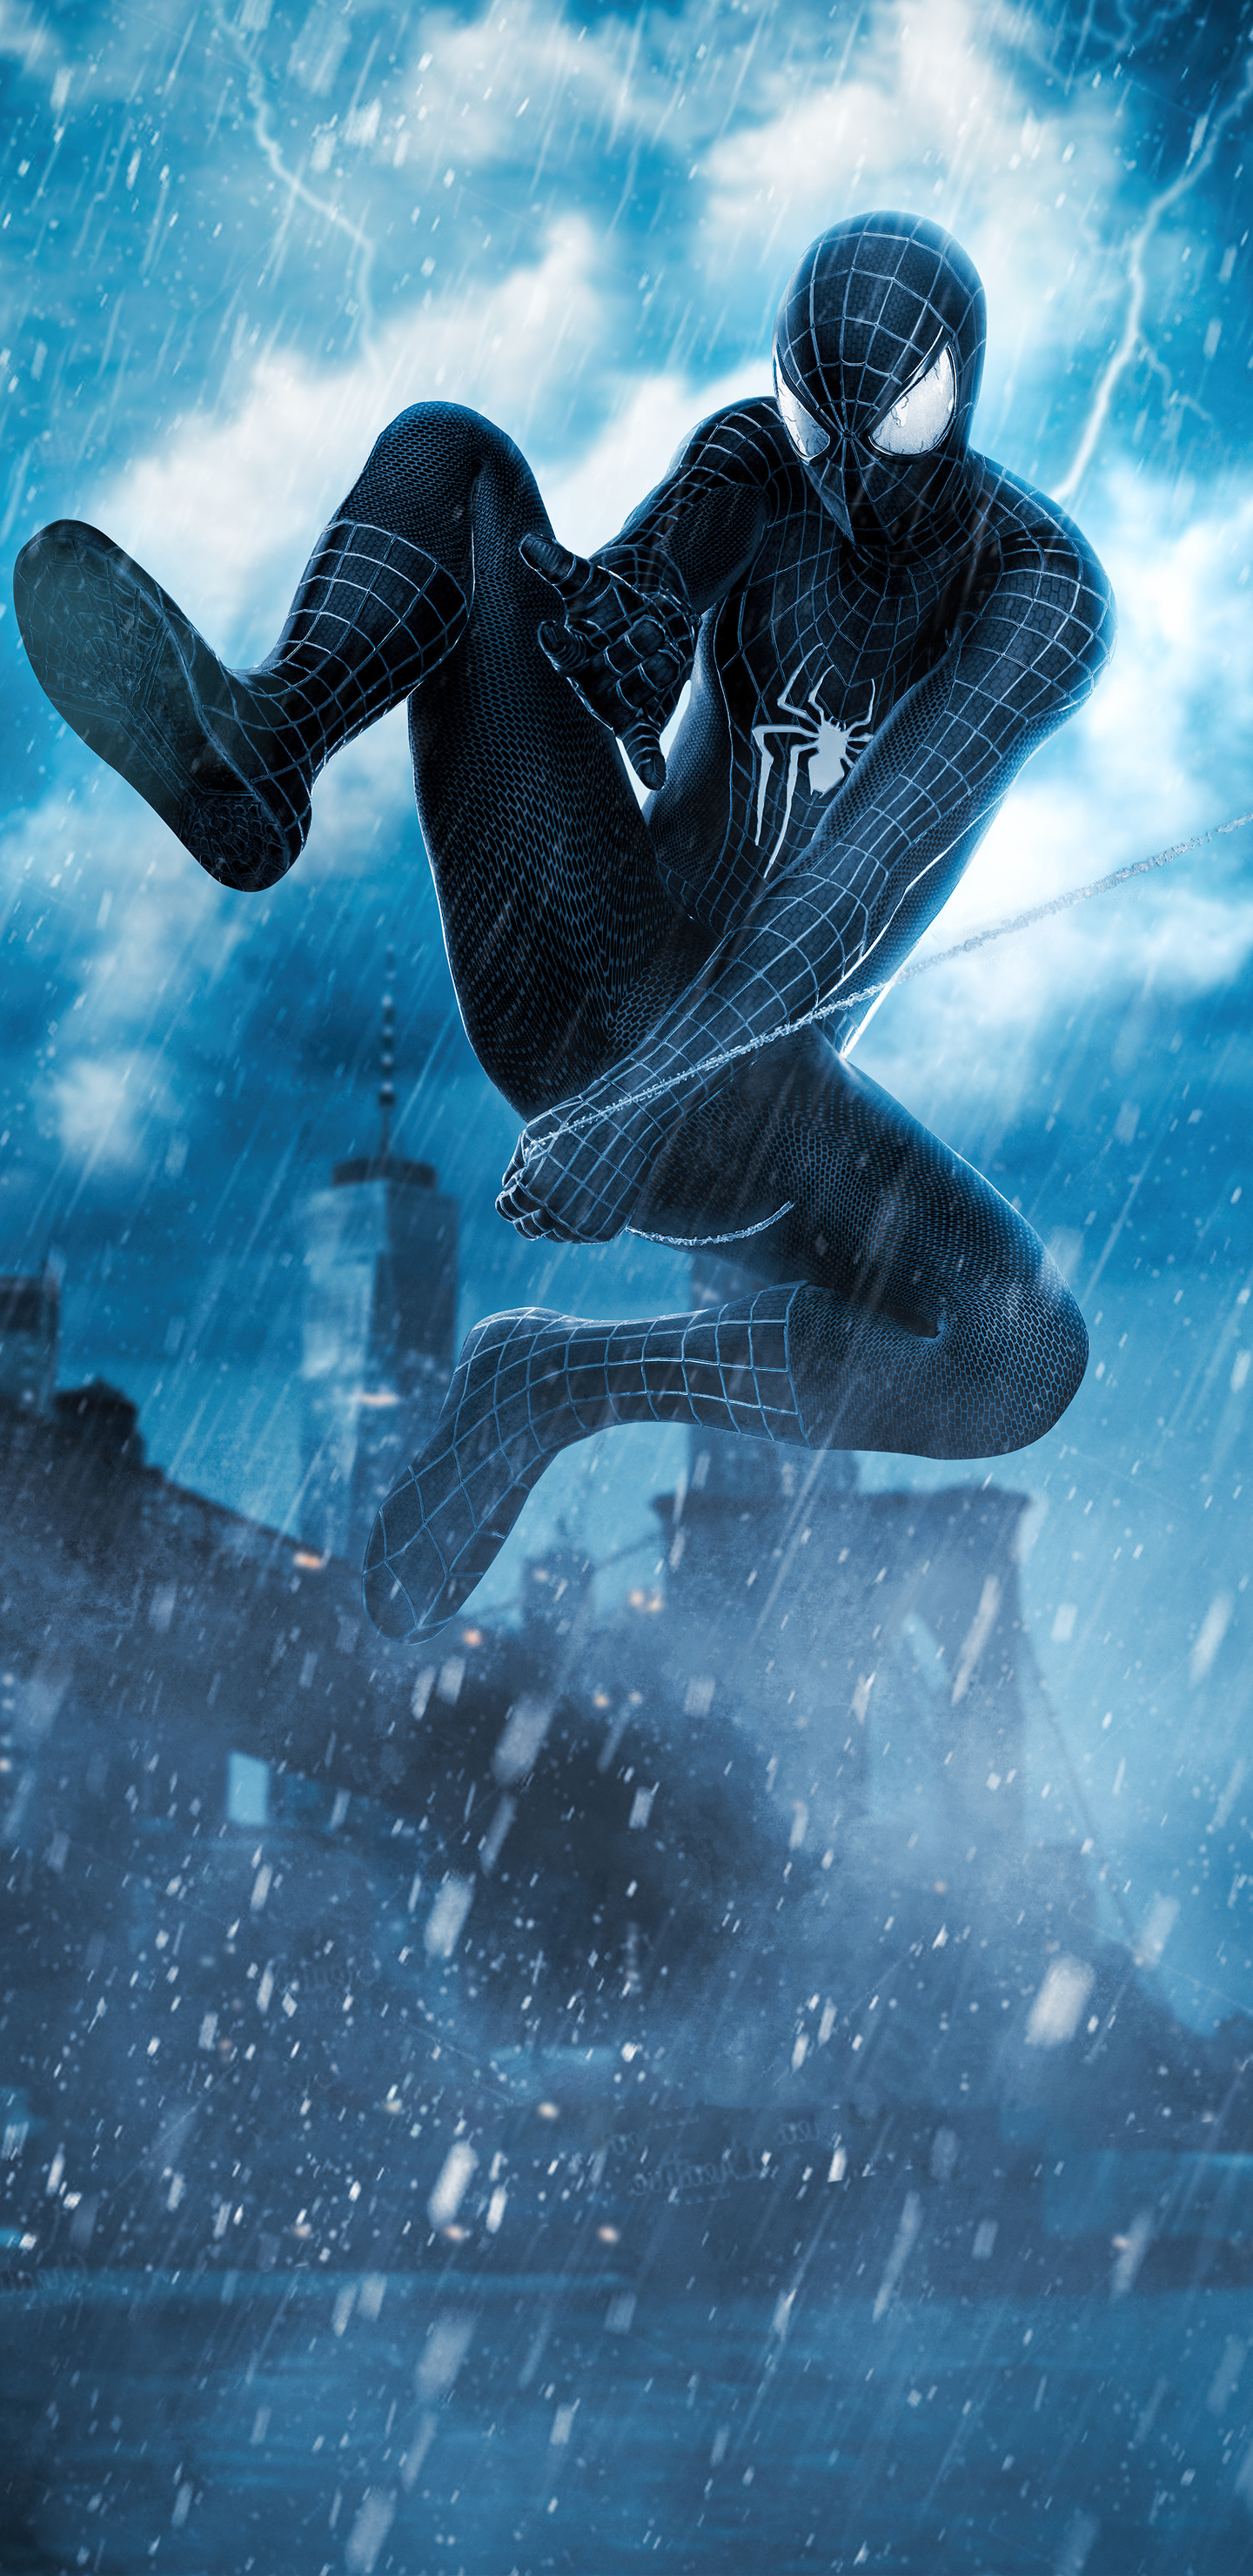 1440x2960 The Amazing Spider Man 3 Poster 5k Samsung Galaxy Note 9,8,  S9,S8,S8+ QHD HD 4k Wallpapers, Images, Backgrounds, Photos and Pictures